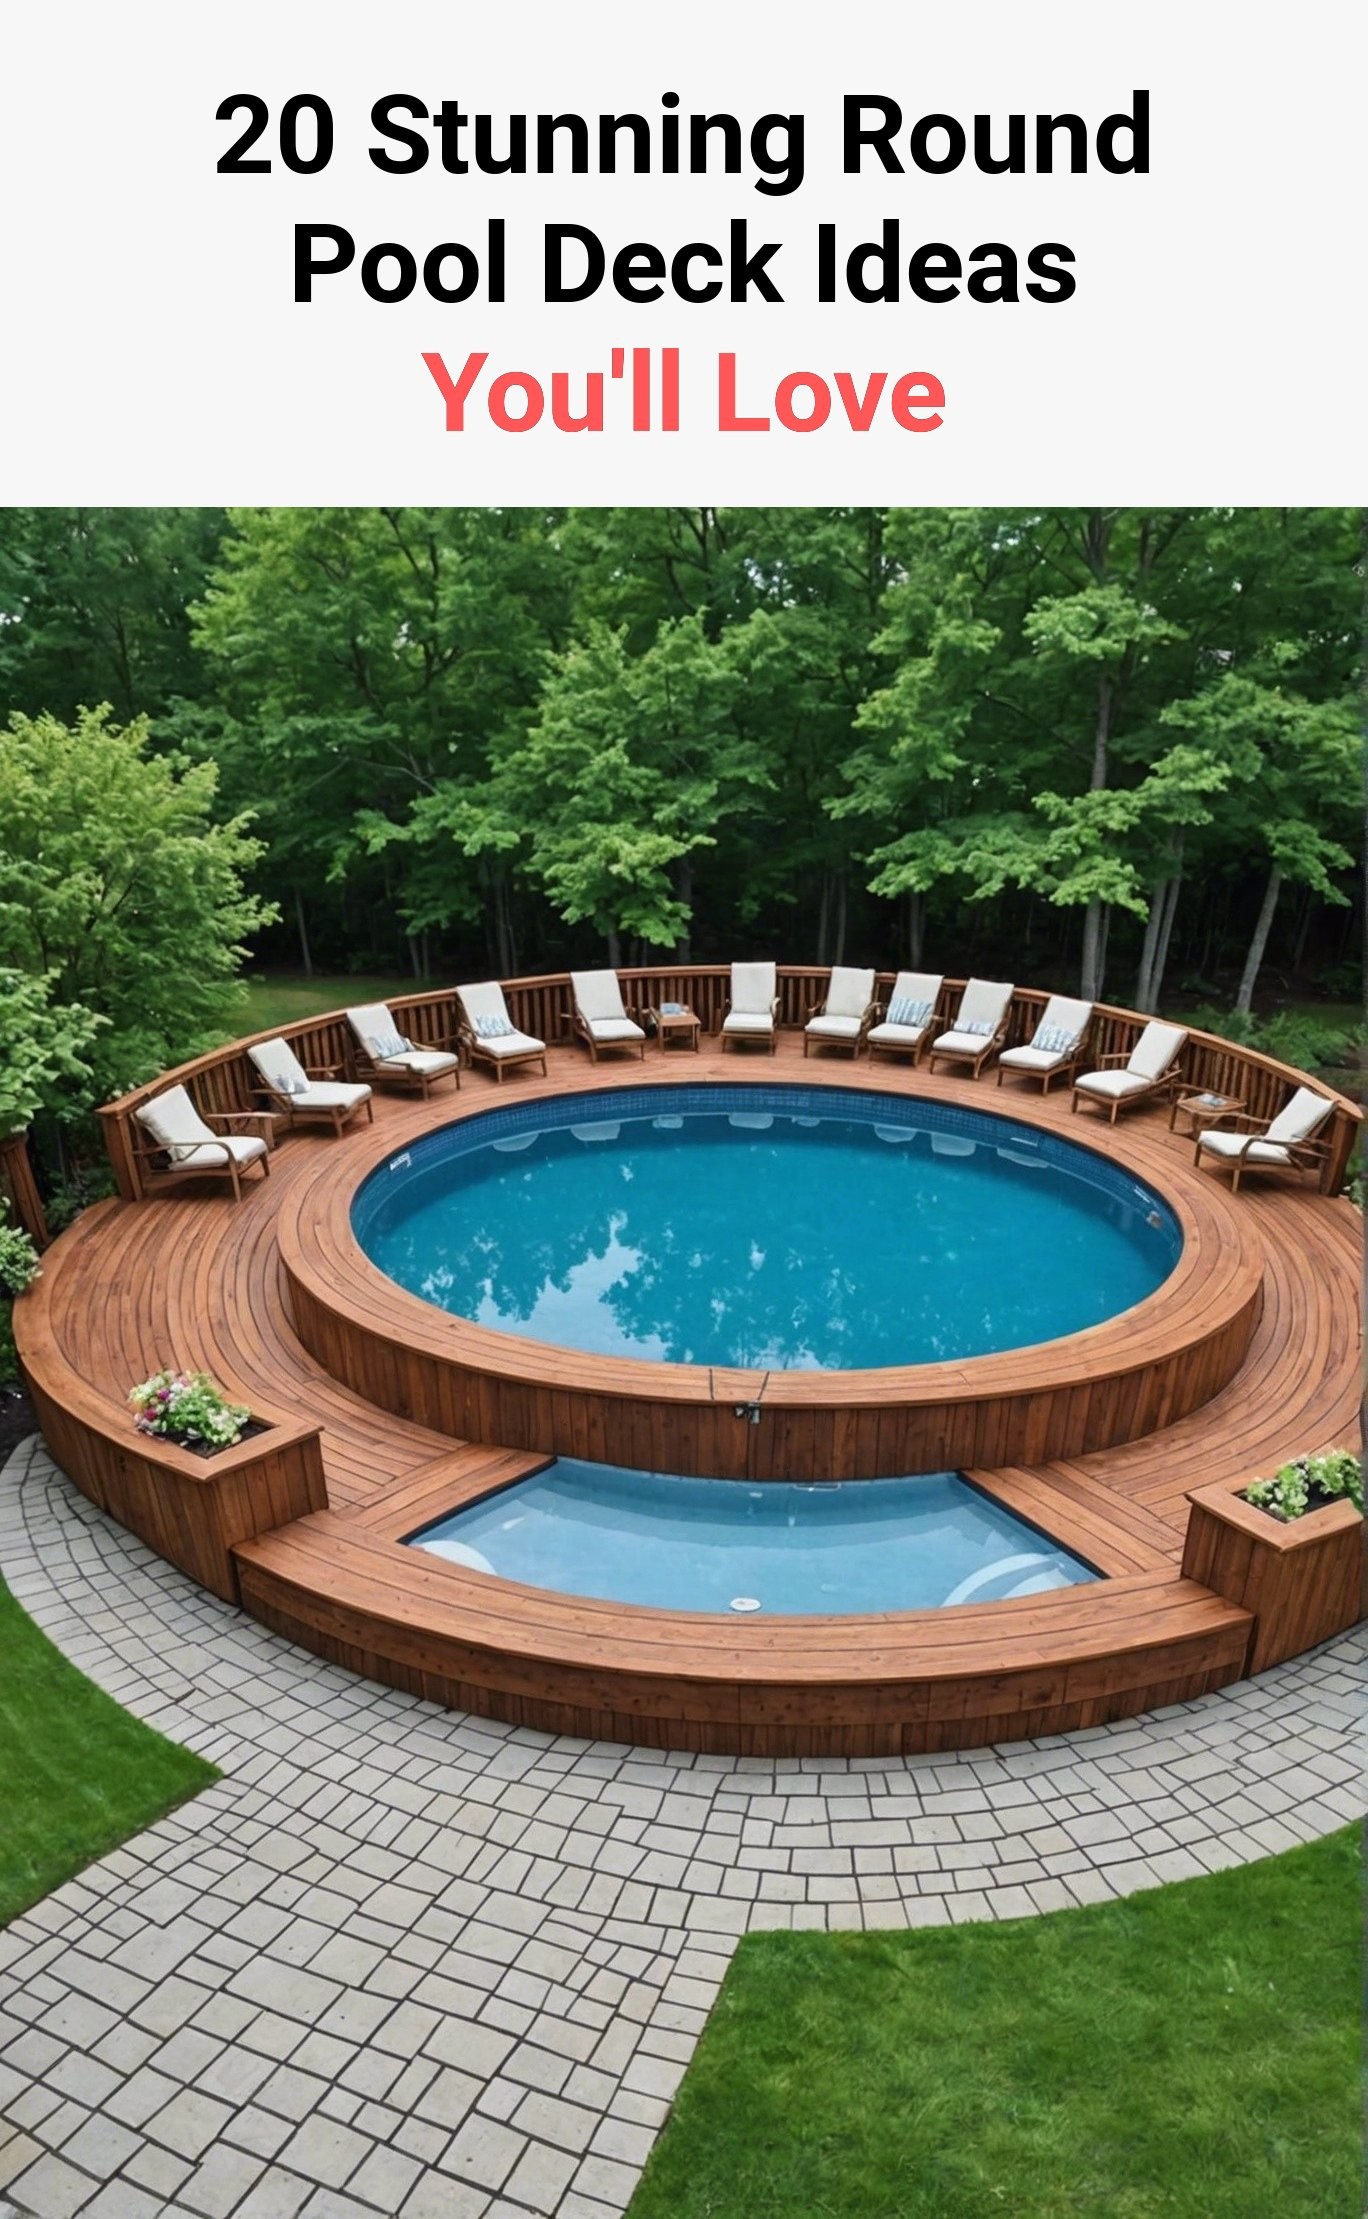 20 Stunning Round Pool Deck Ideas You'll Love